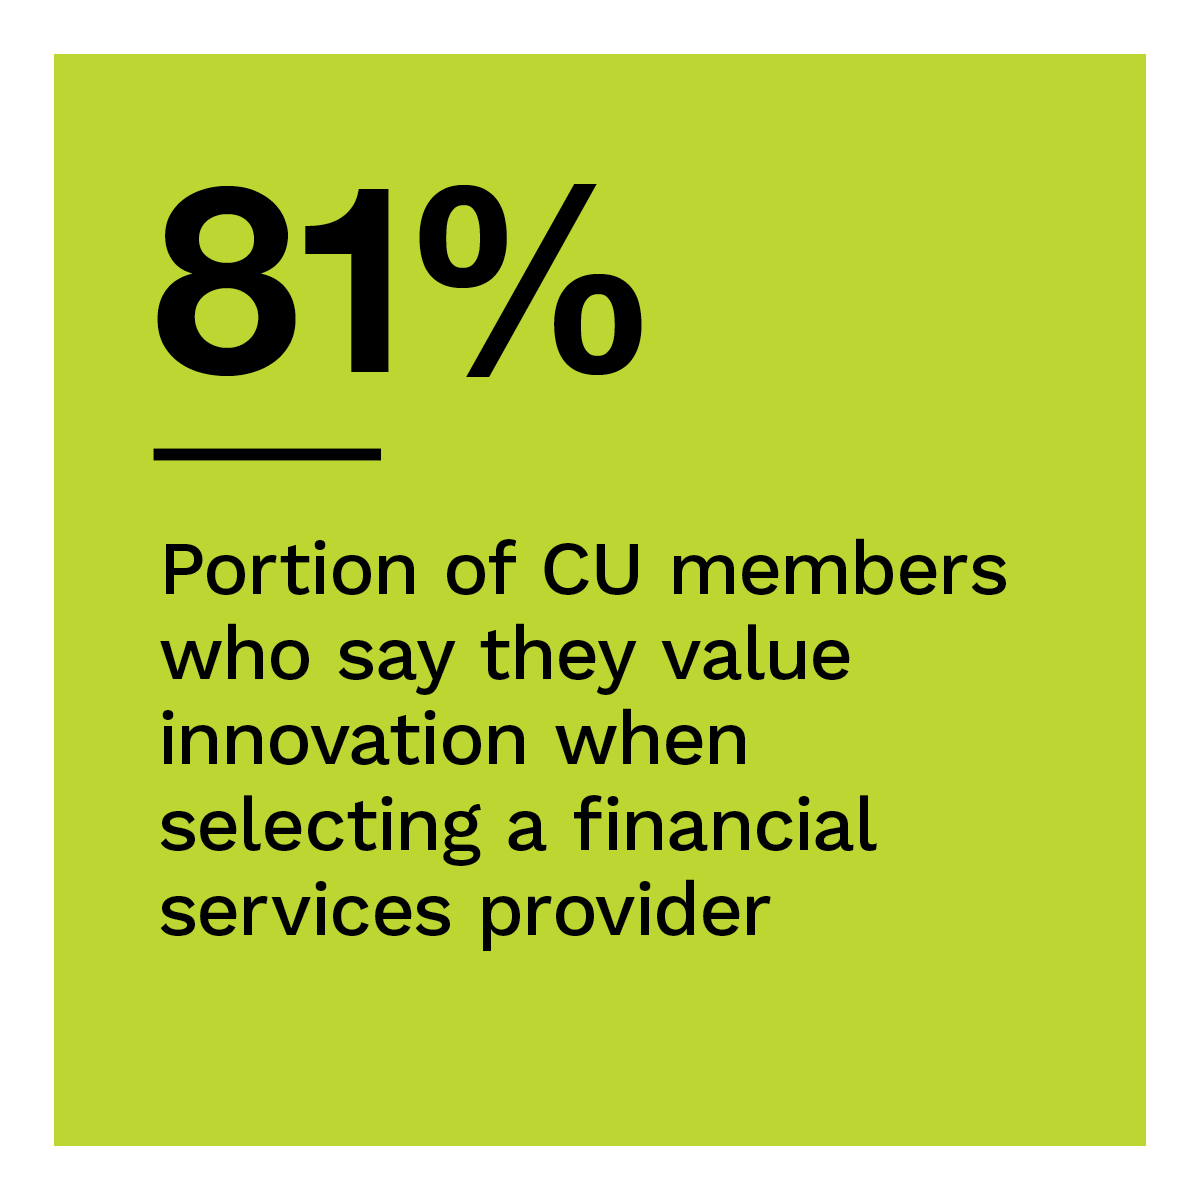  Portion of CU members who say they value innovation when selecting a financial services provider